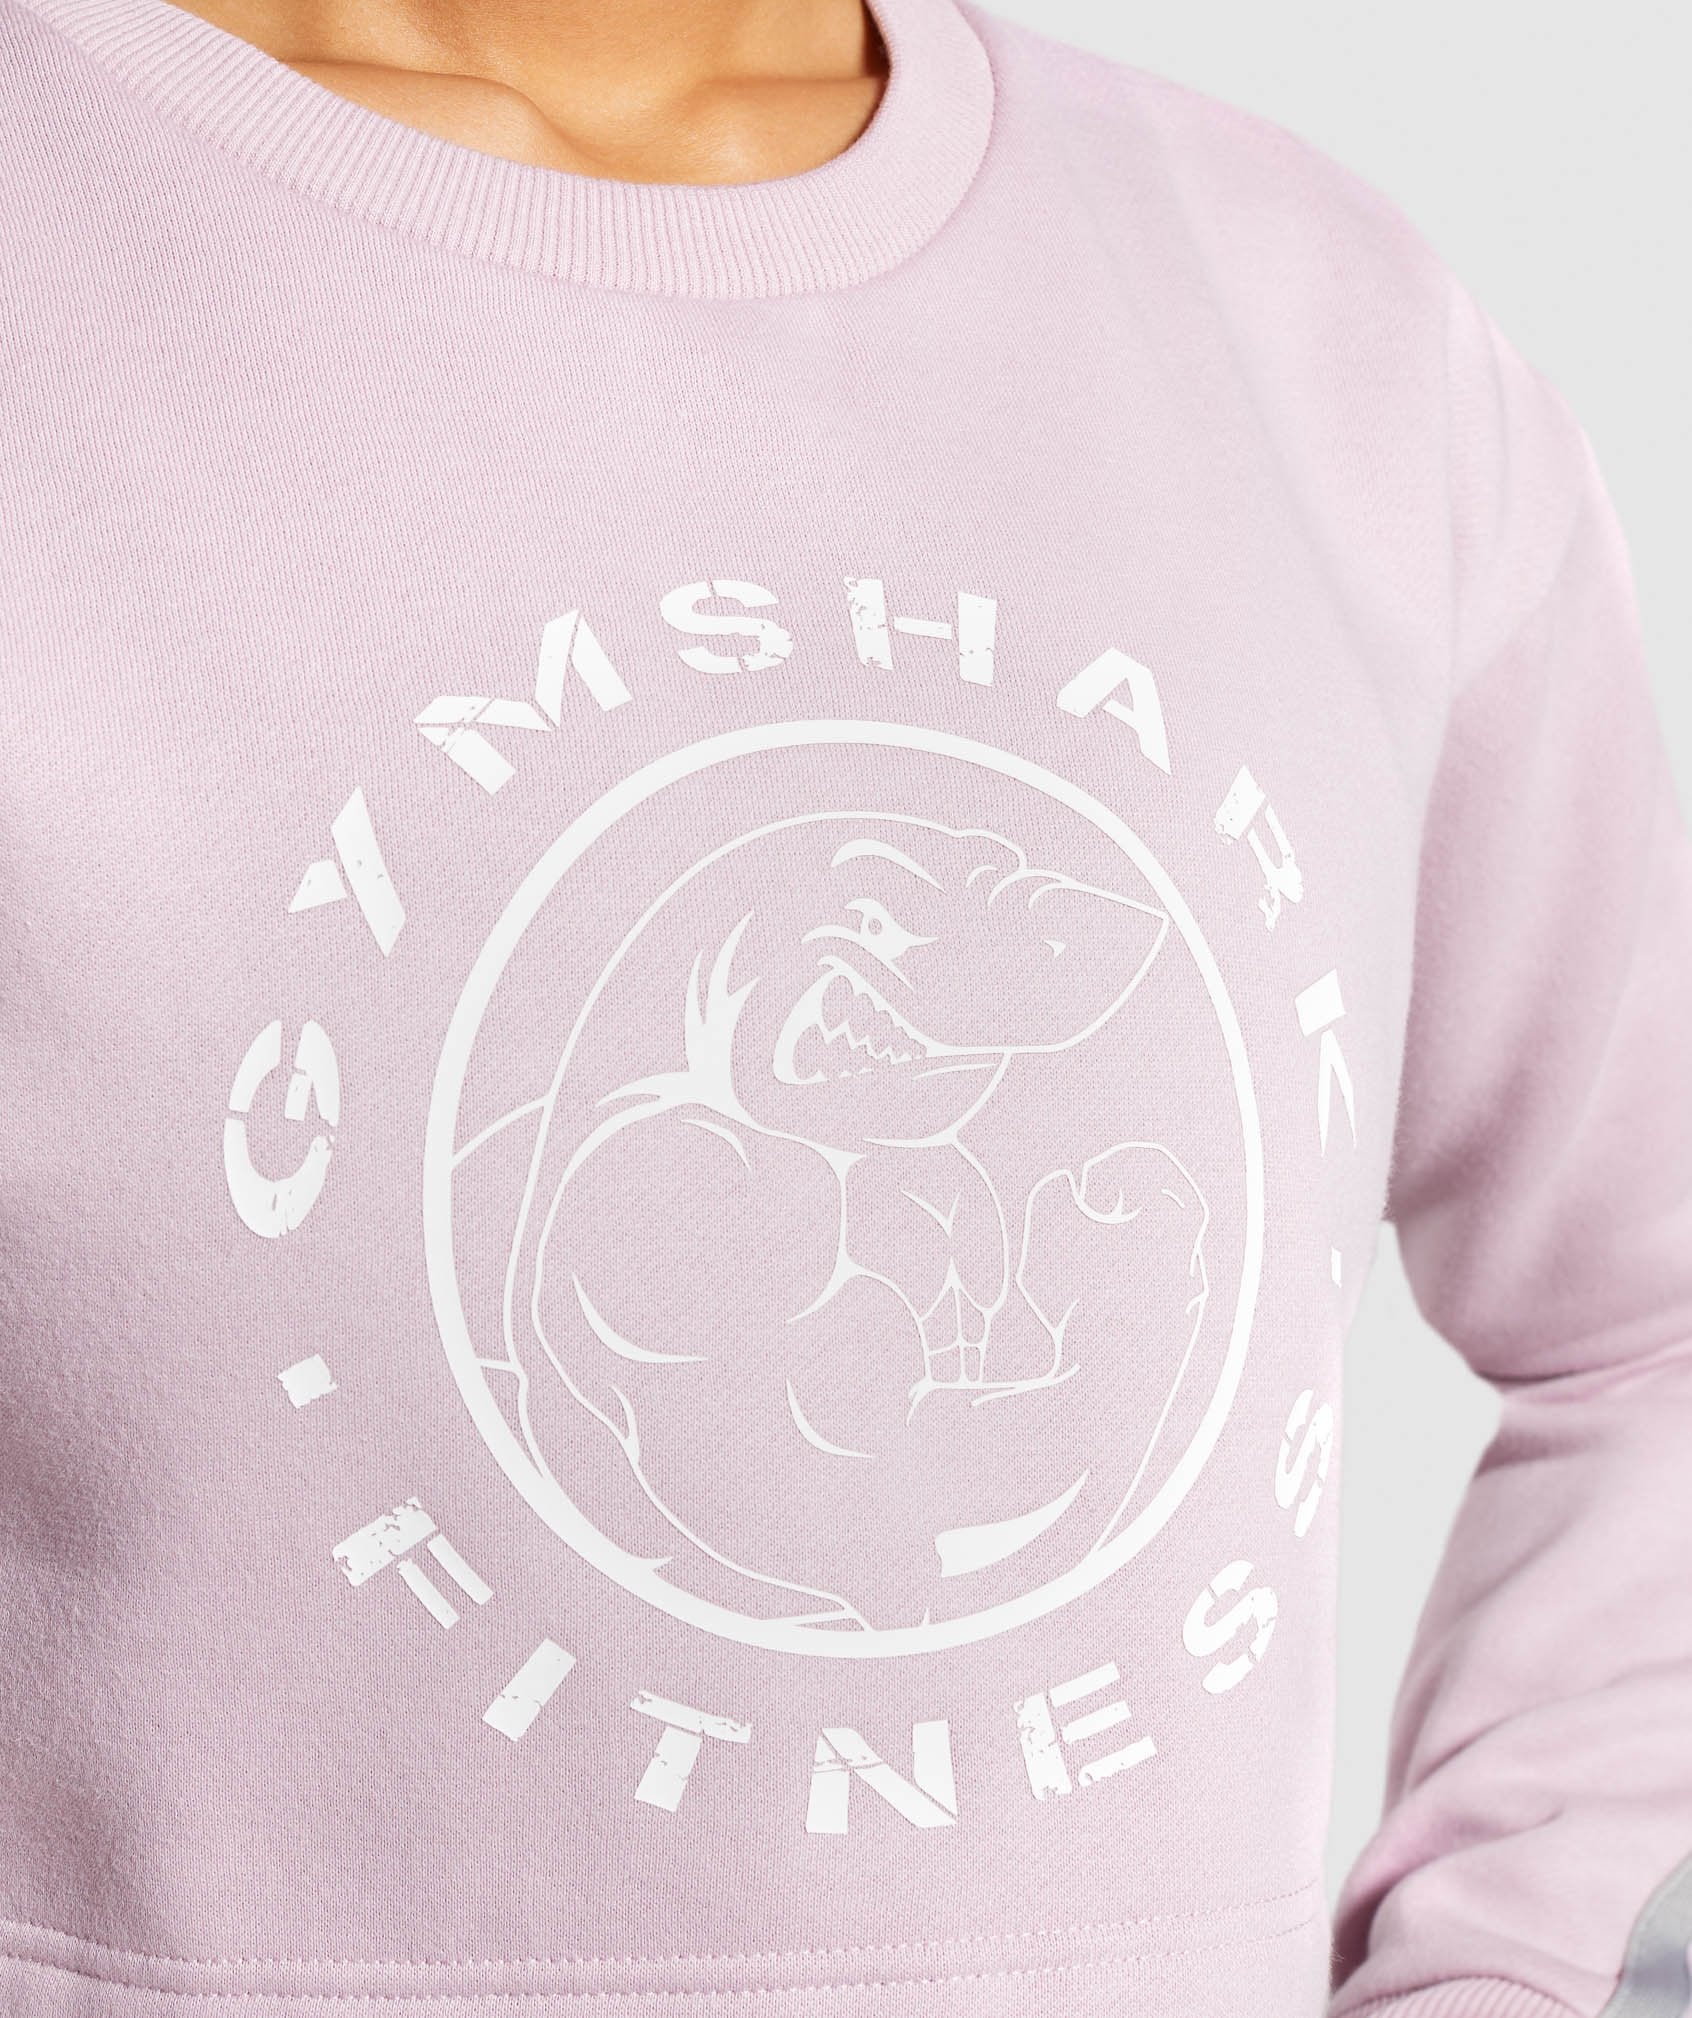 Legacy Fitness Sweater in Washed Lavender